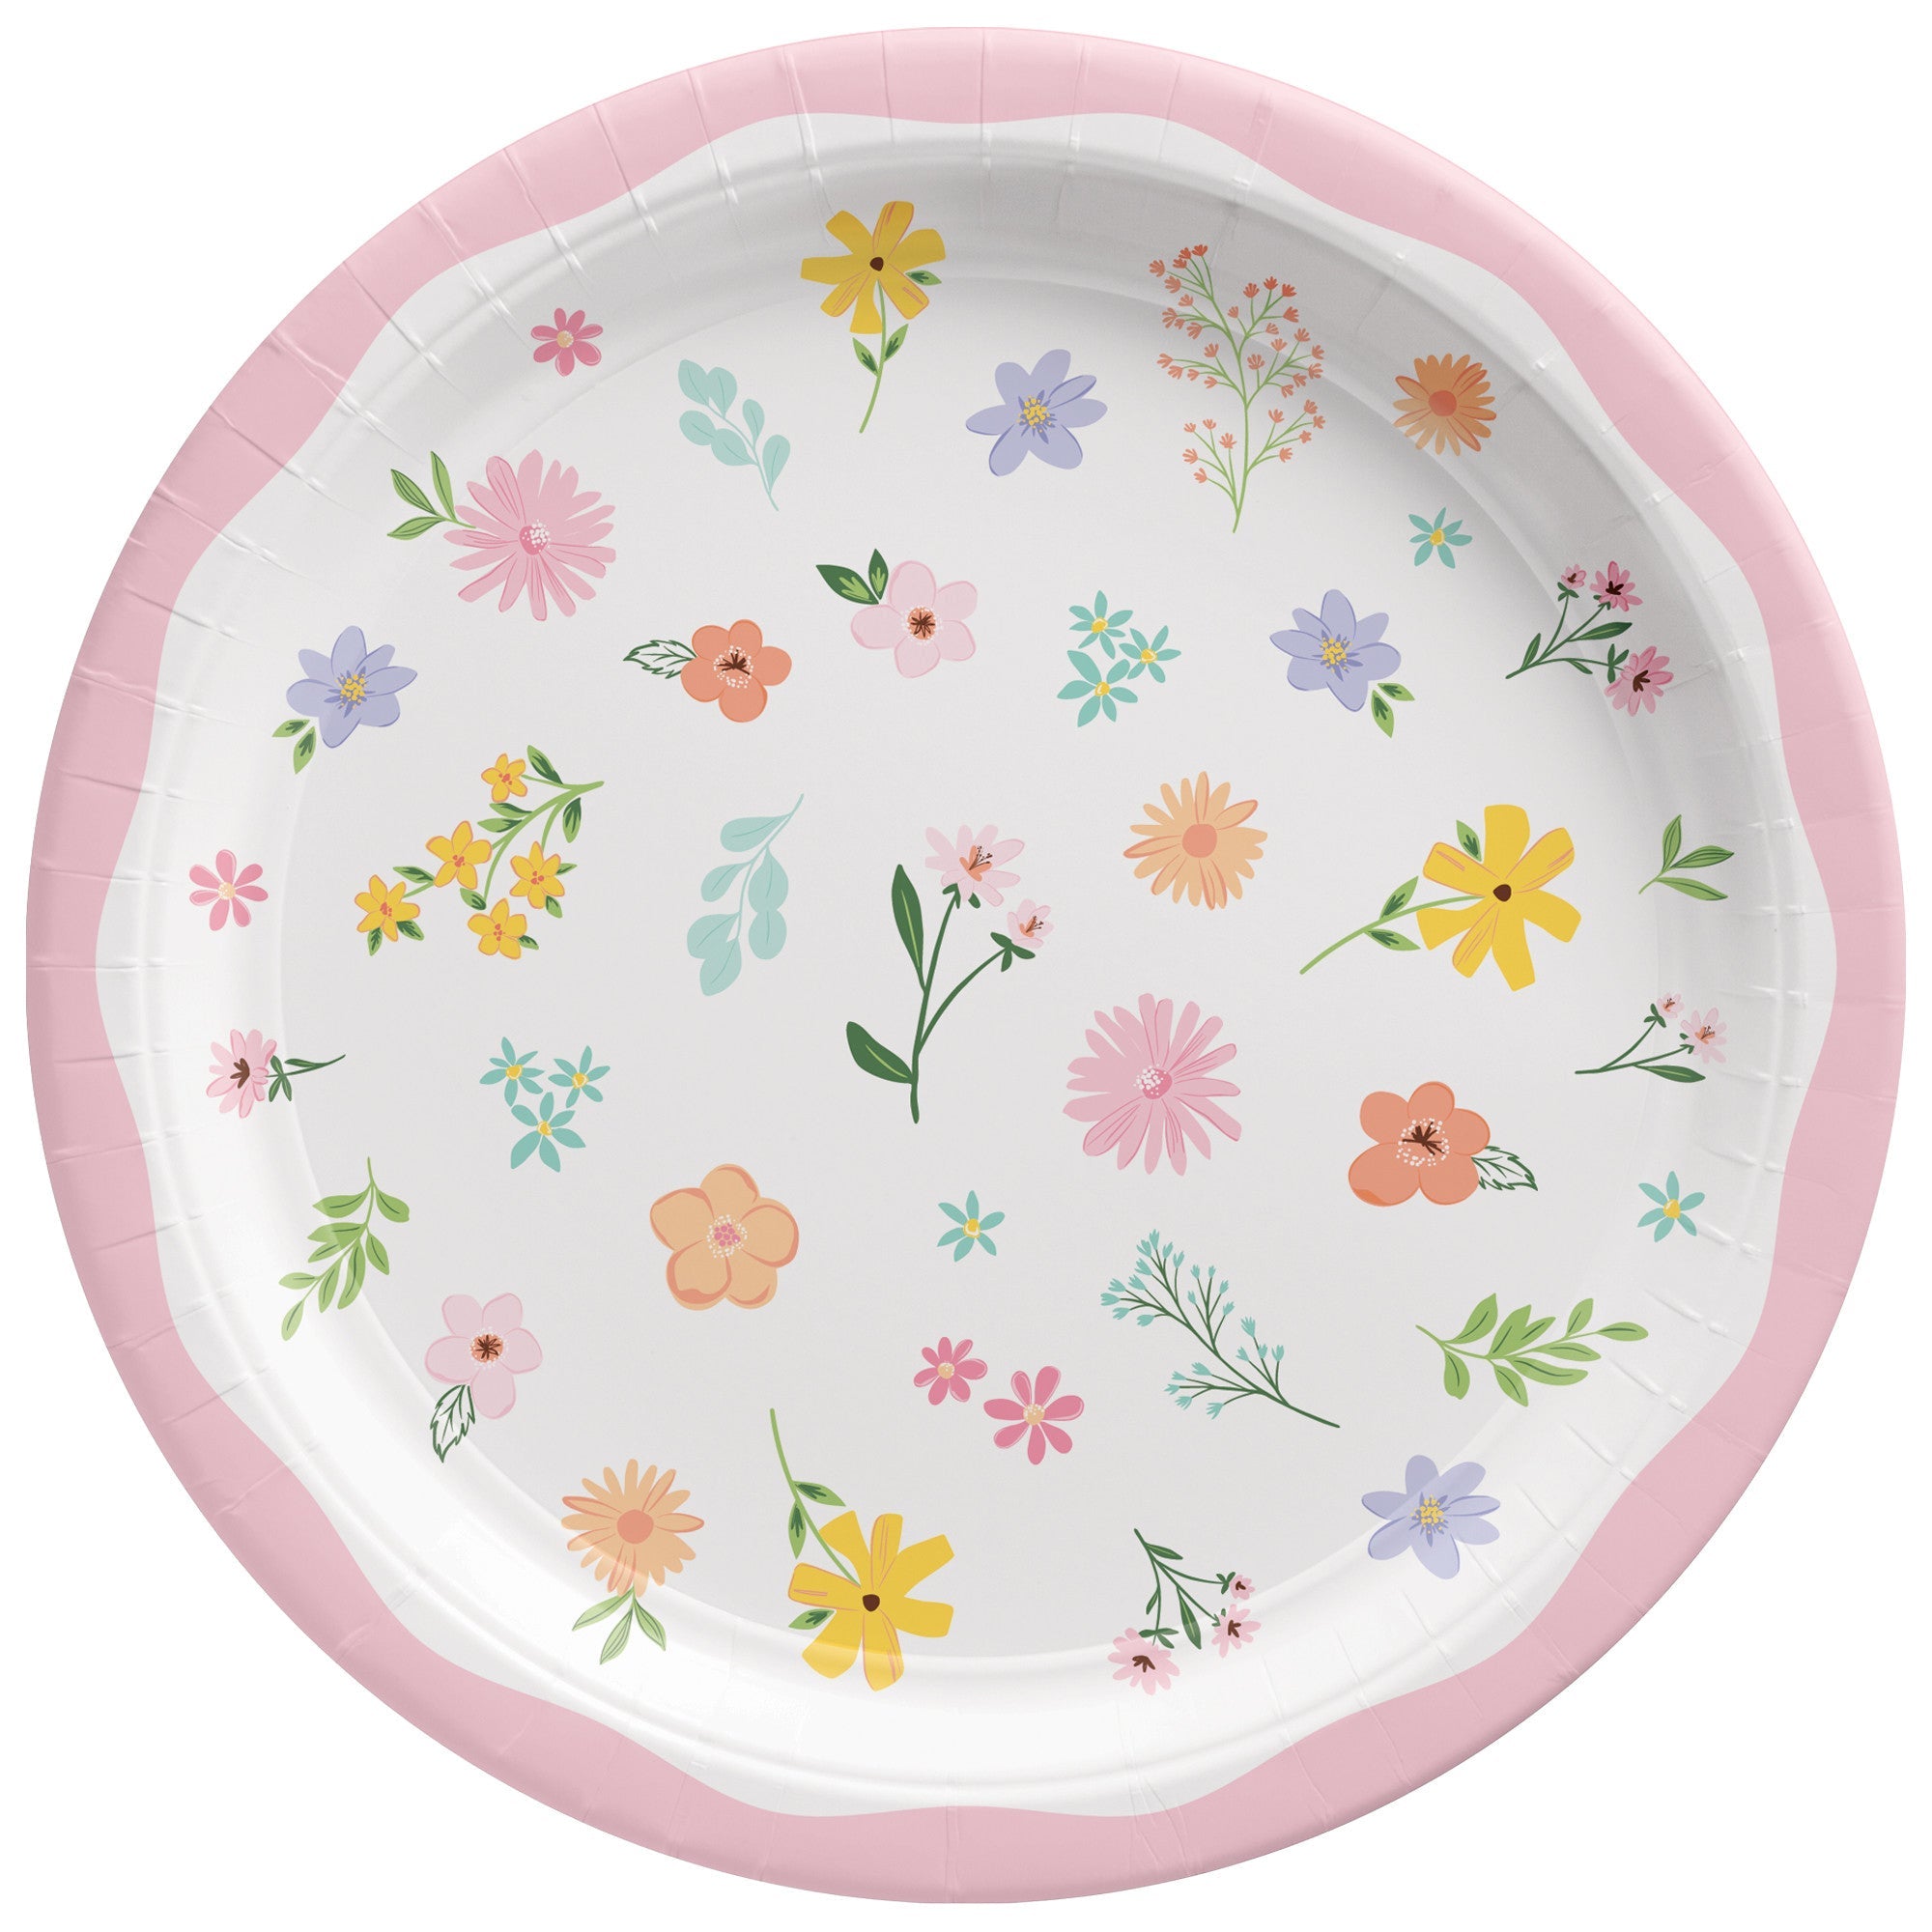 Springtime Blooms 8 Round Paper Plates 7in